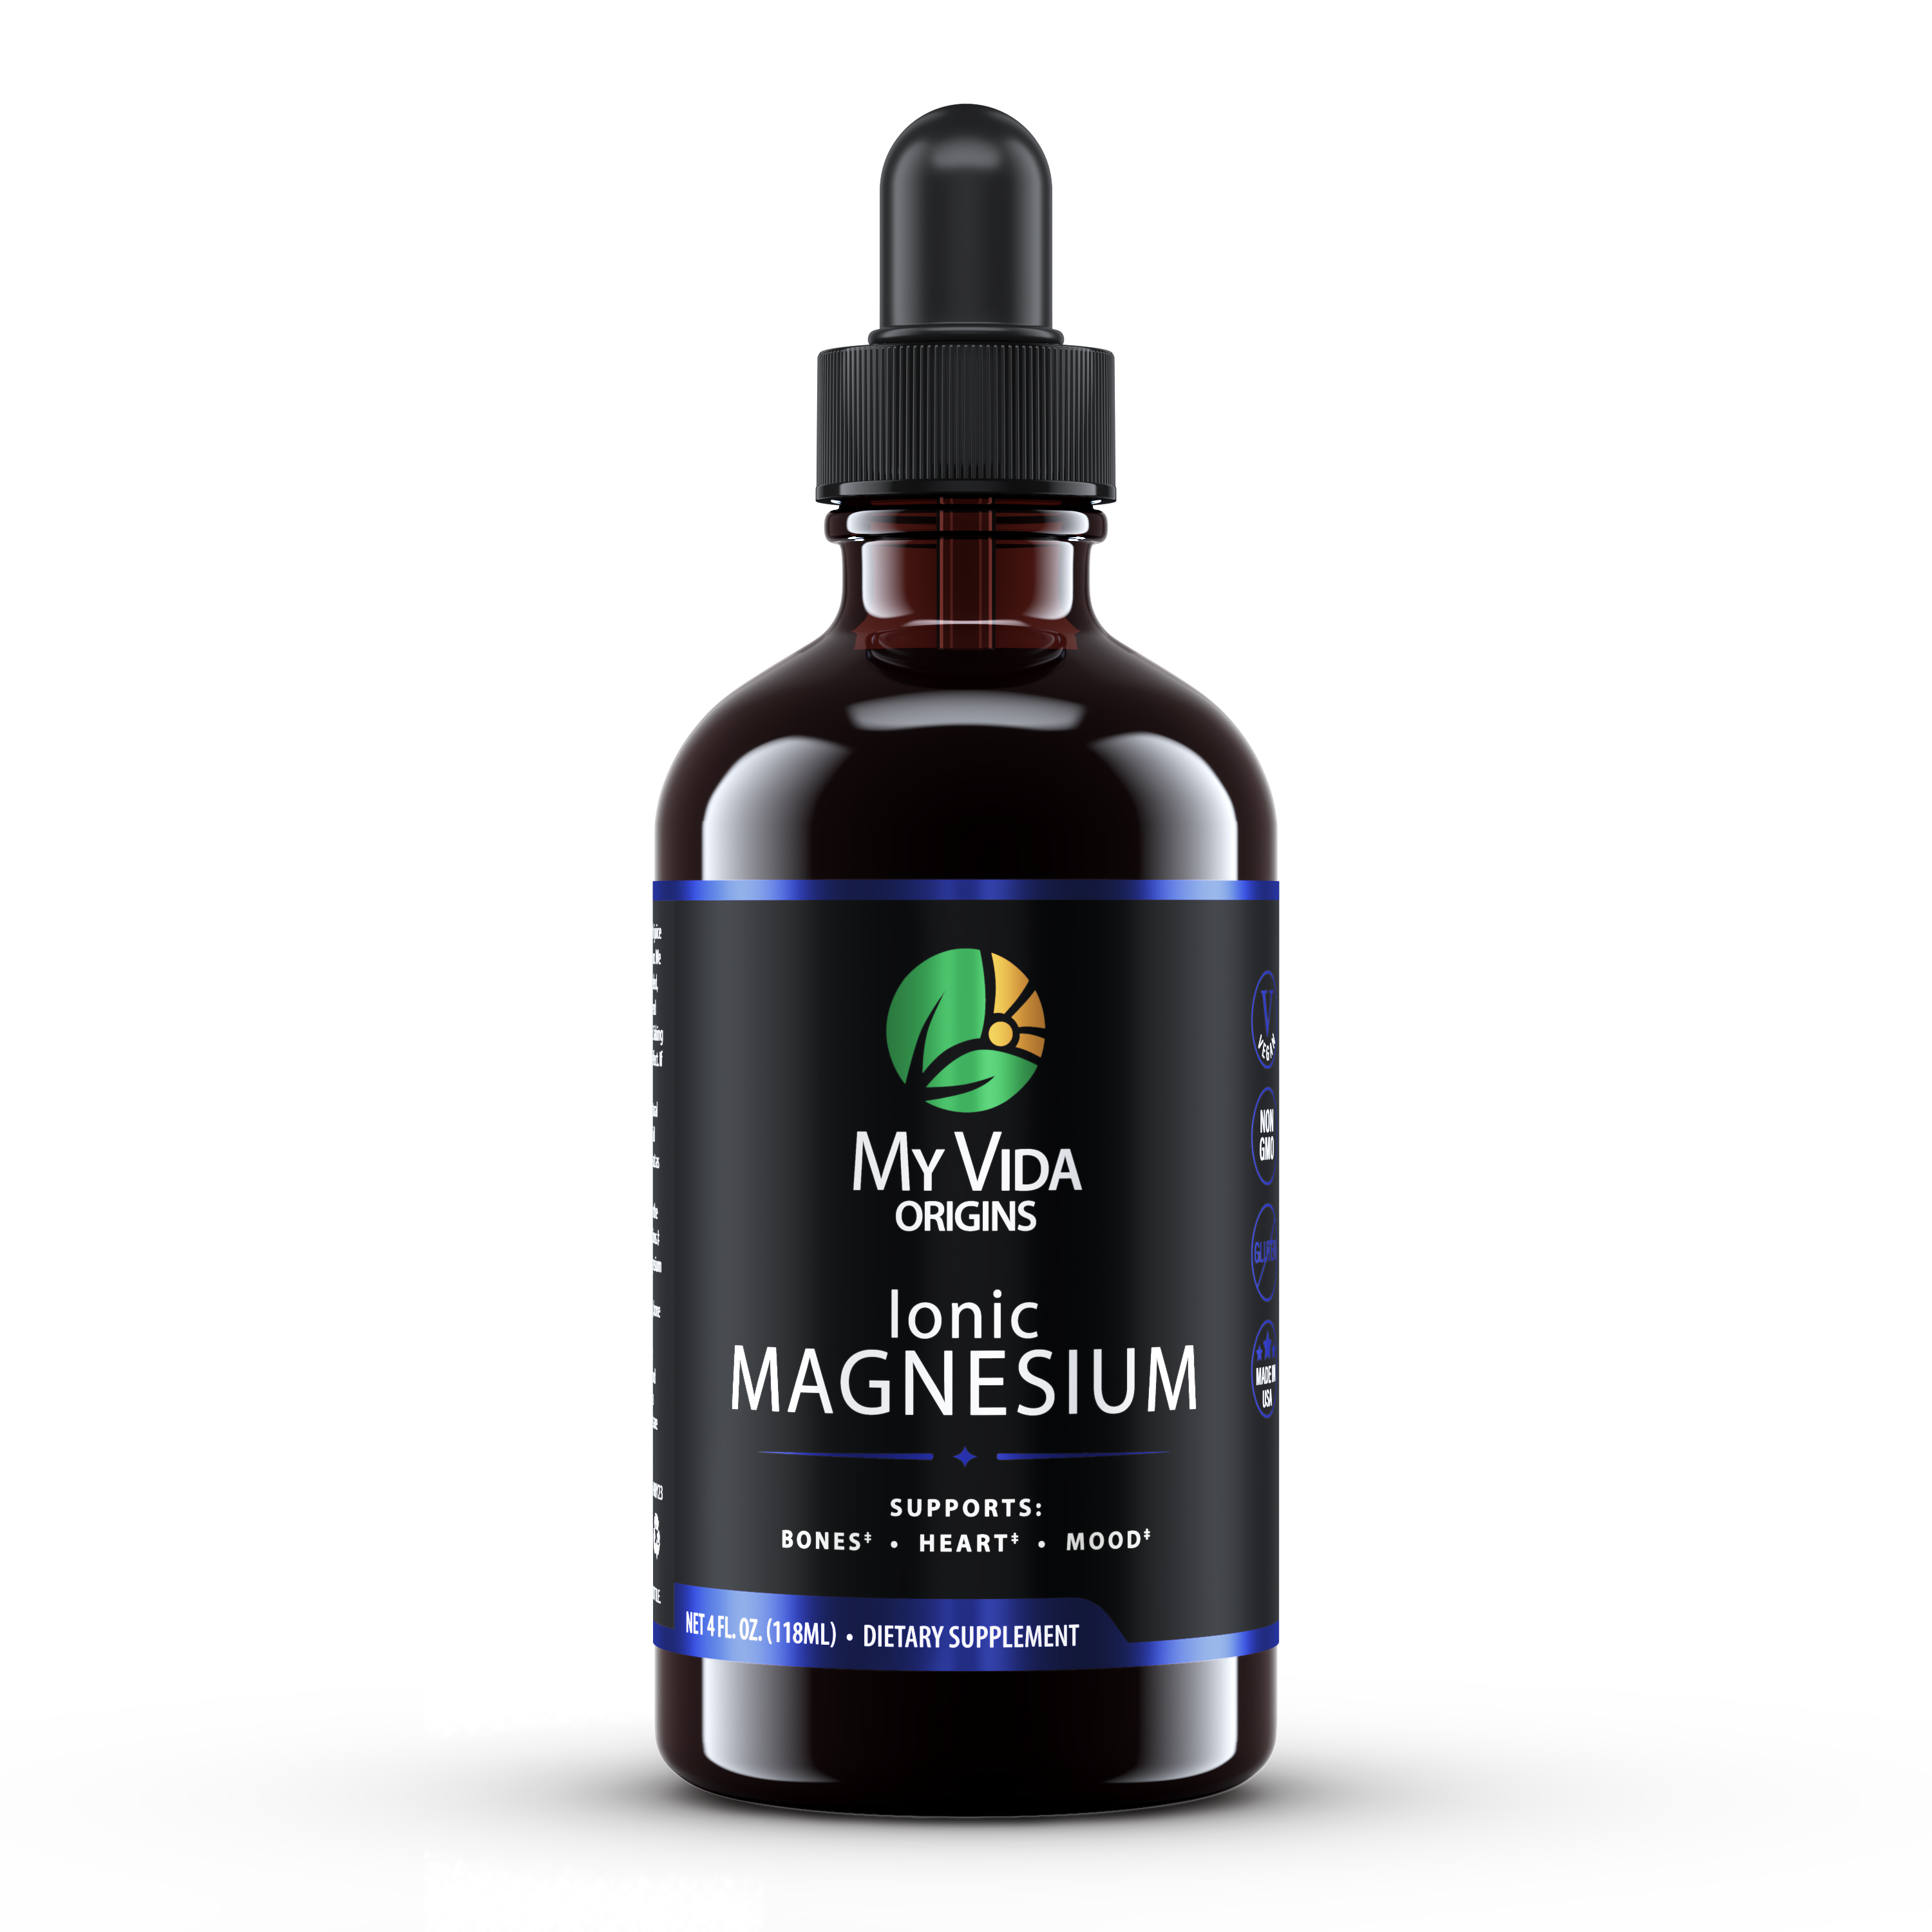 Trace Minerals | Mega-Mag 400 mg Liquid Magnesium Chloride | Supports  Normal Muscle Function | 30 Servings, 4 fl oz (1 Pack)